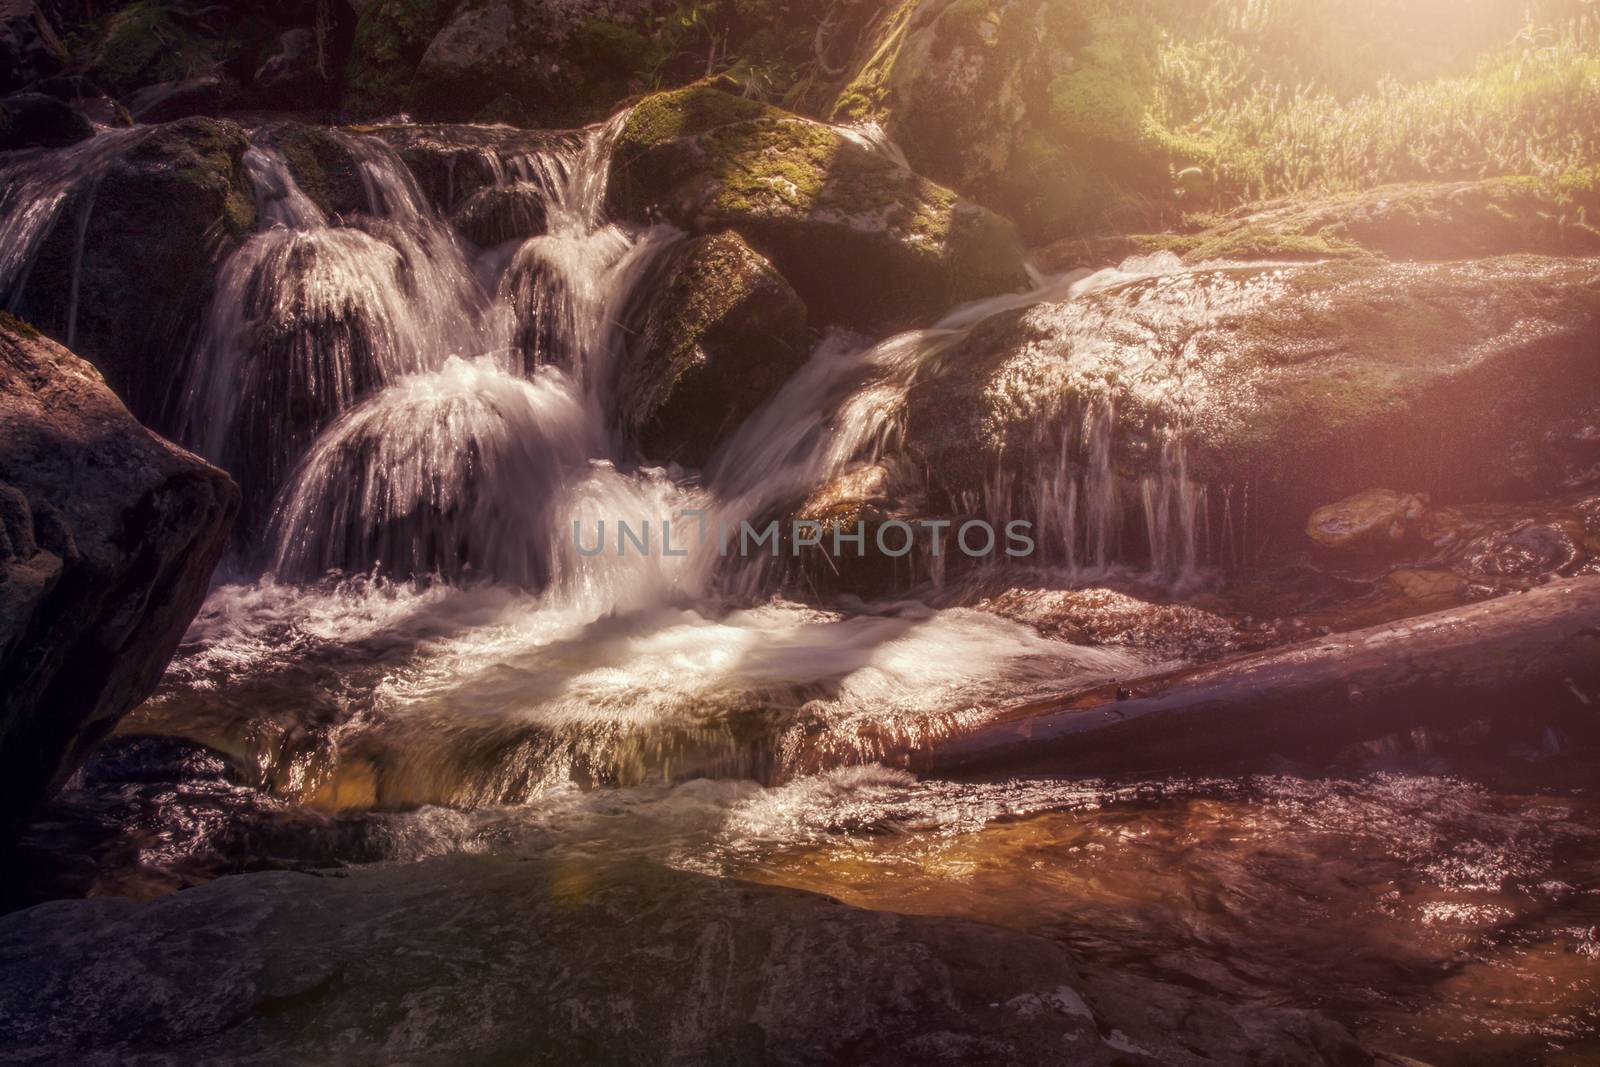 Logn exposure at a little waterfall with sun